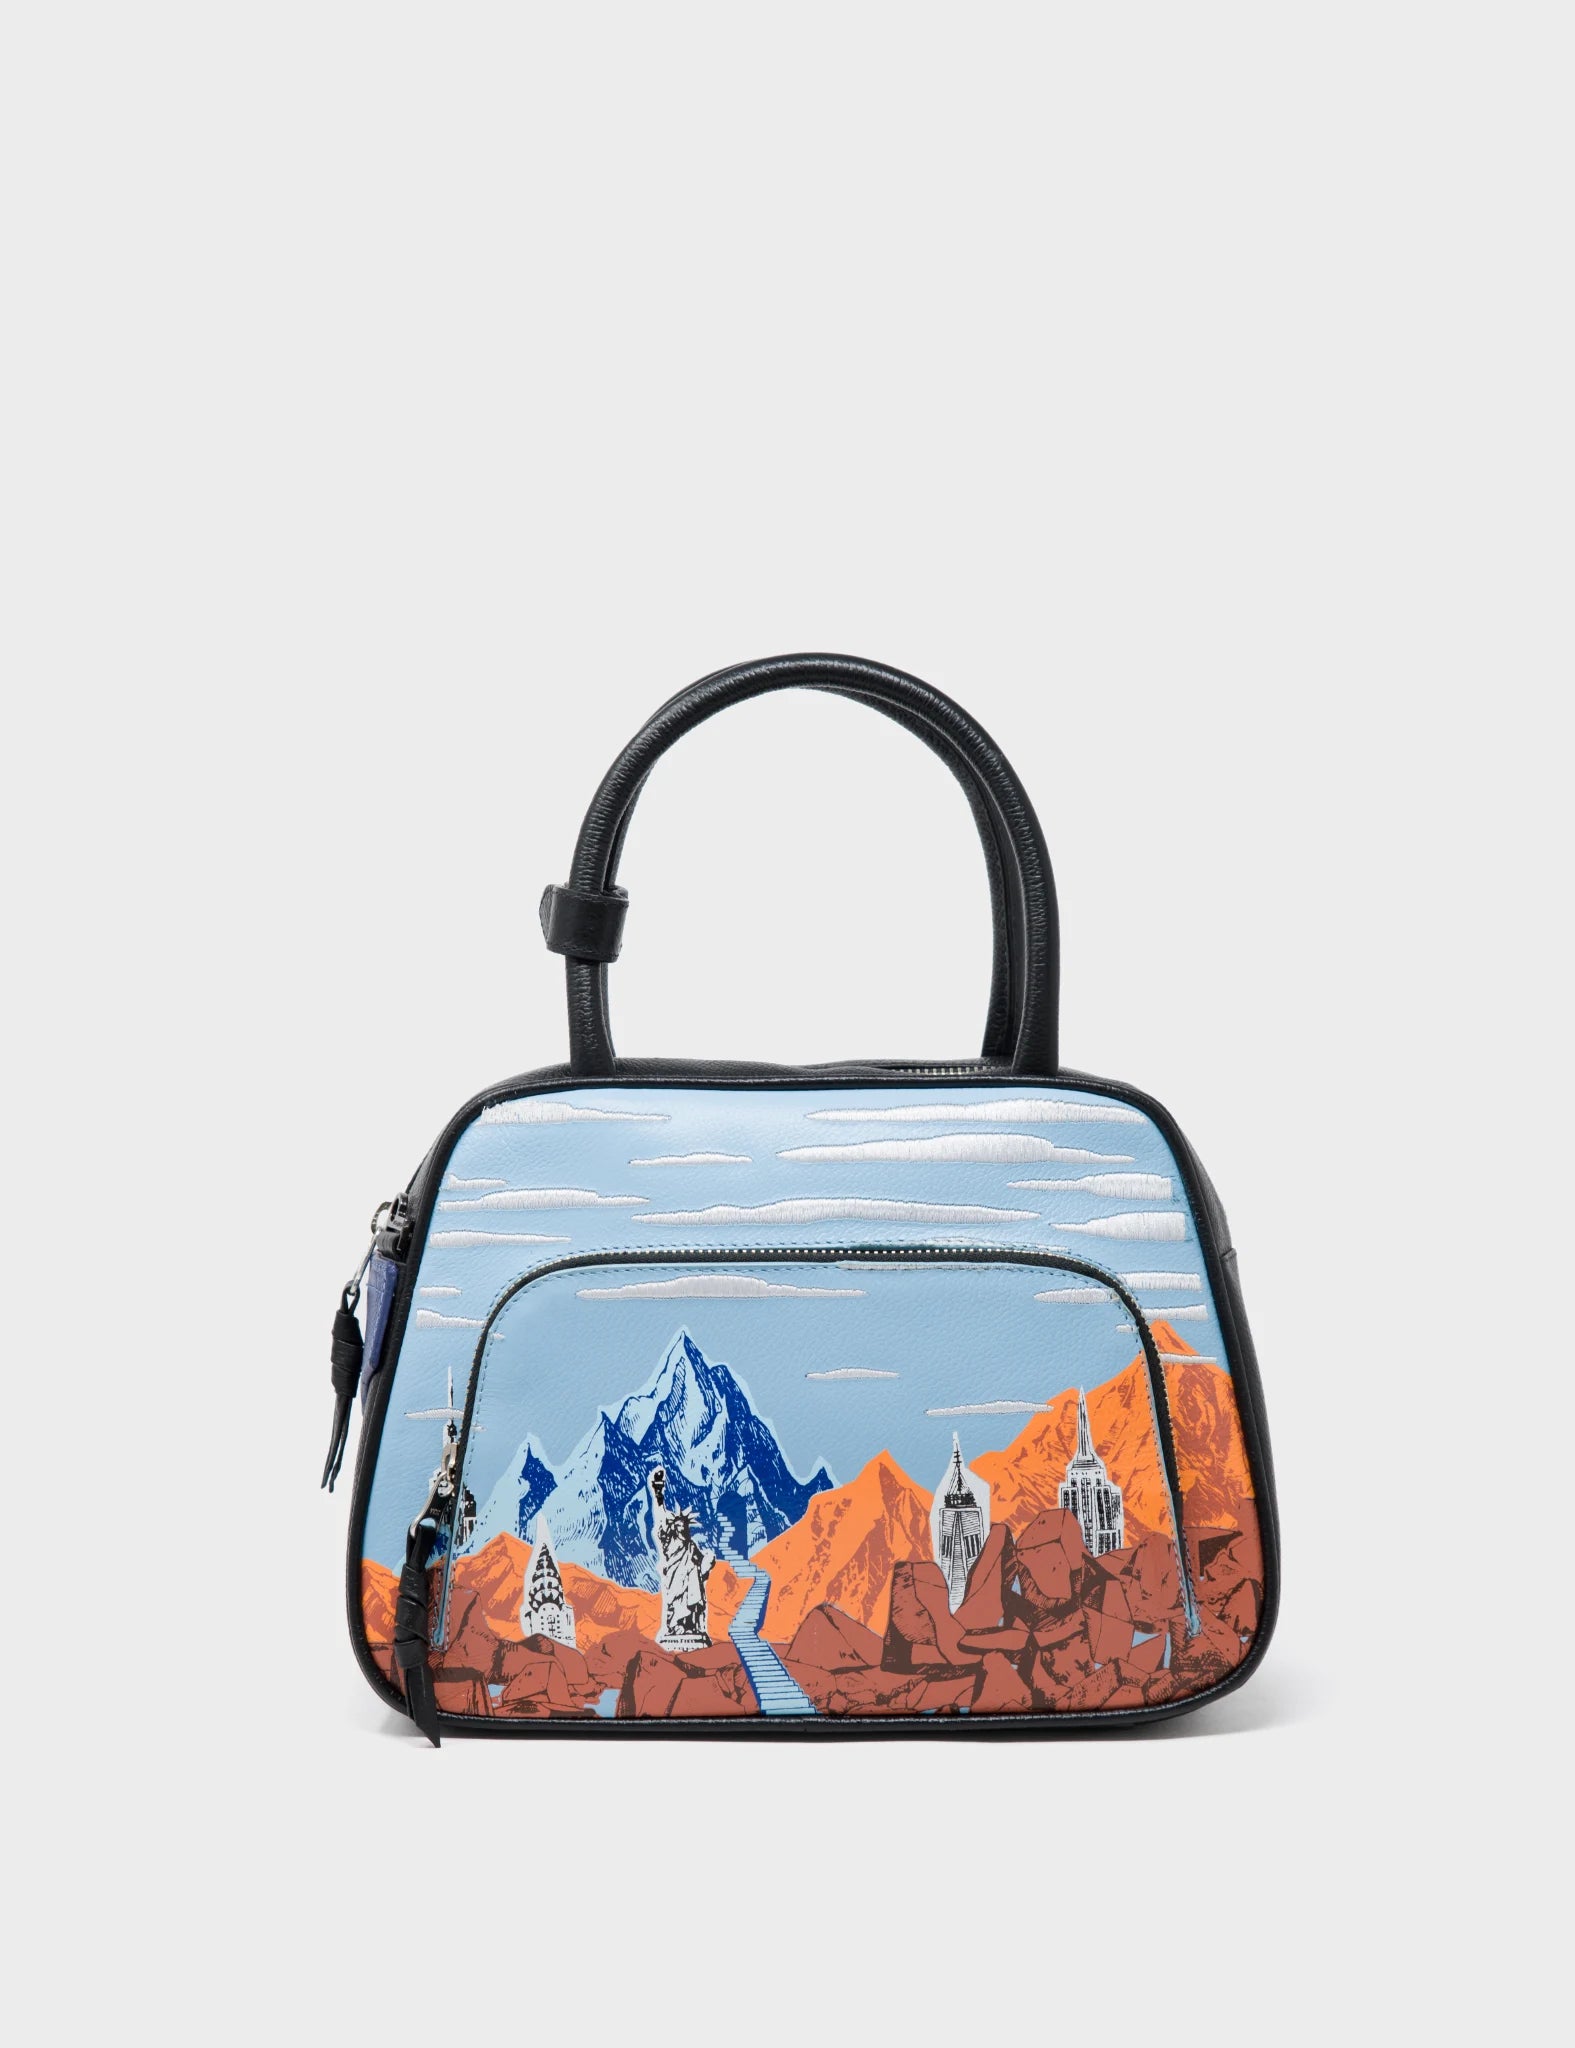 Blue Crossbody Leather Bag - Mountains, Flowers and Clouds Design - Front 